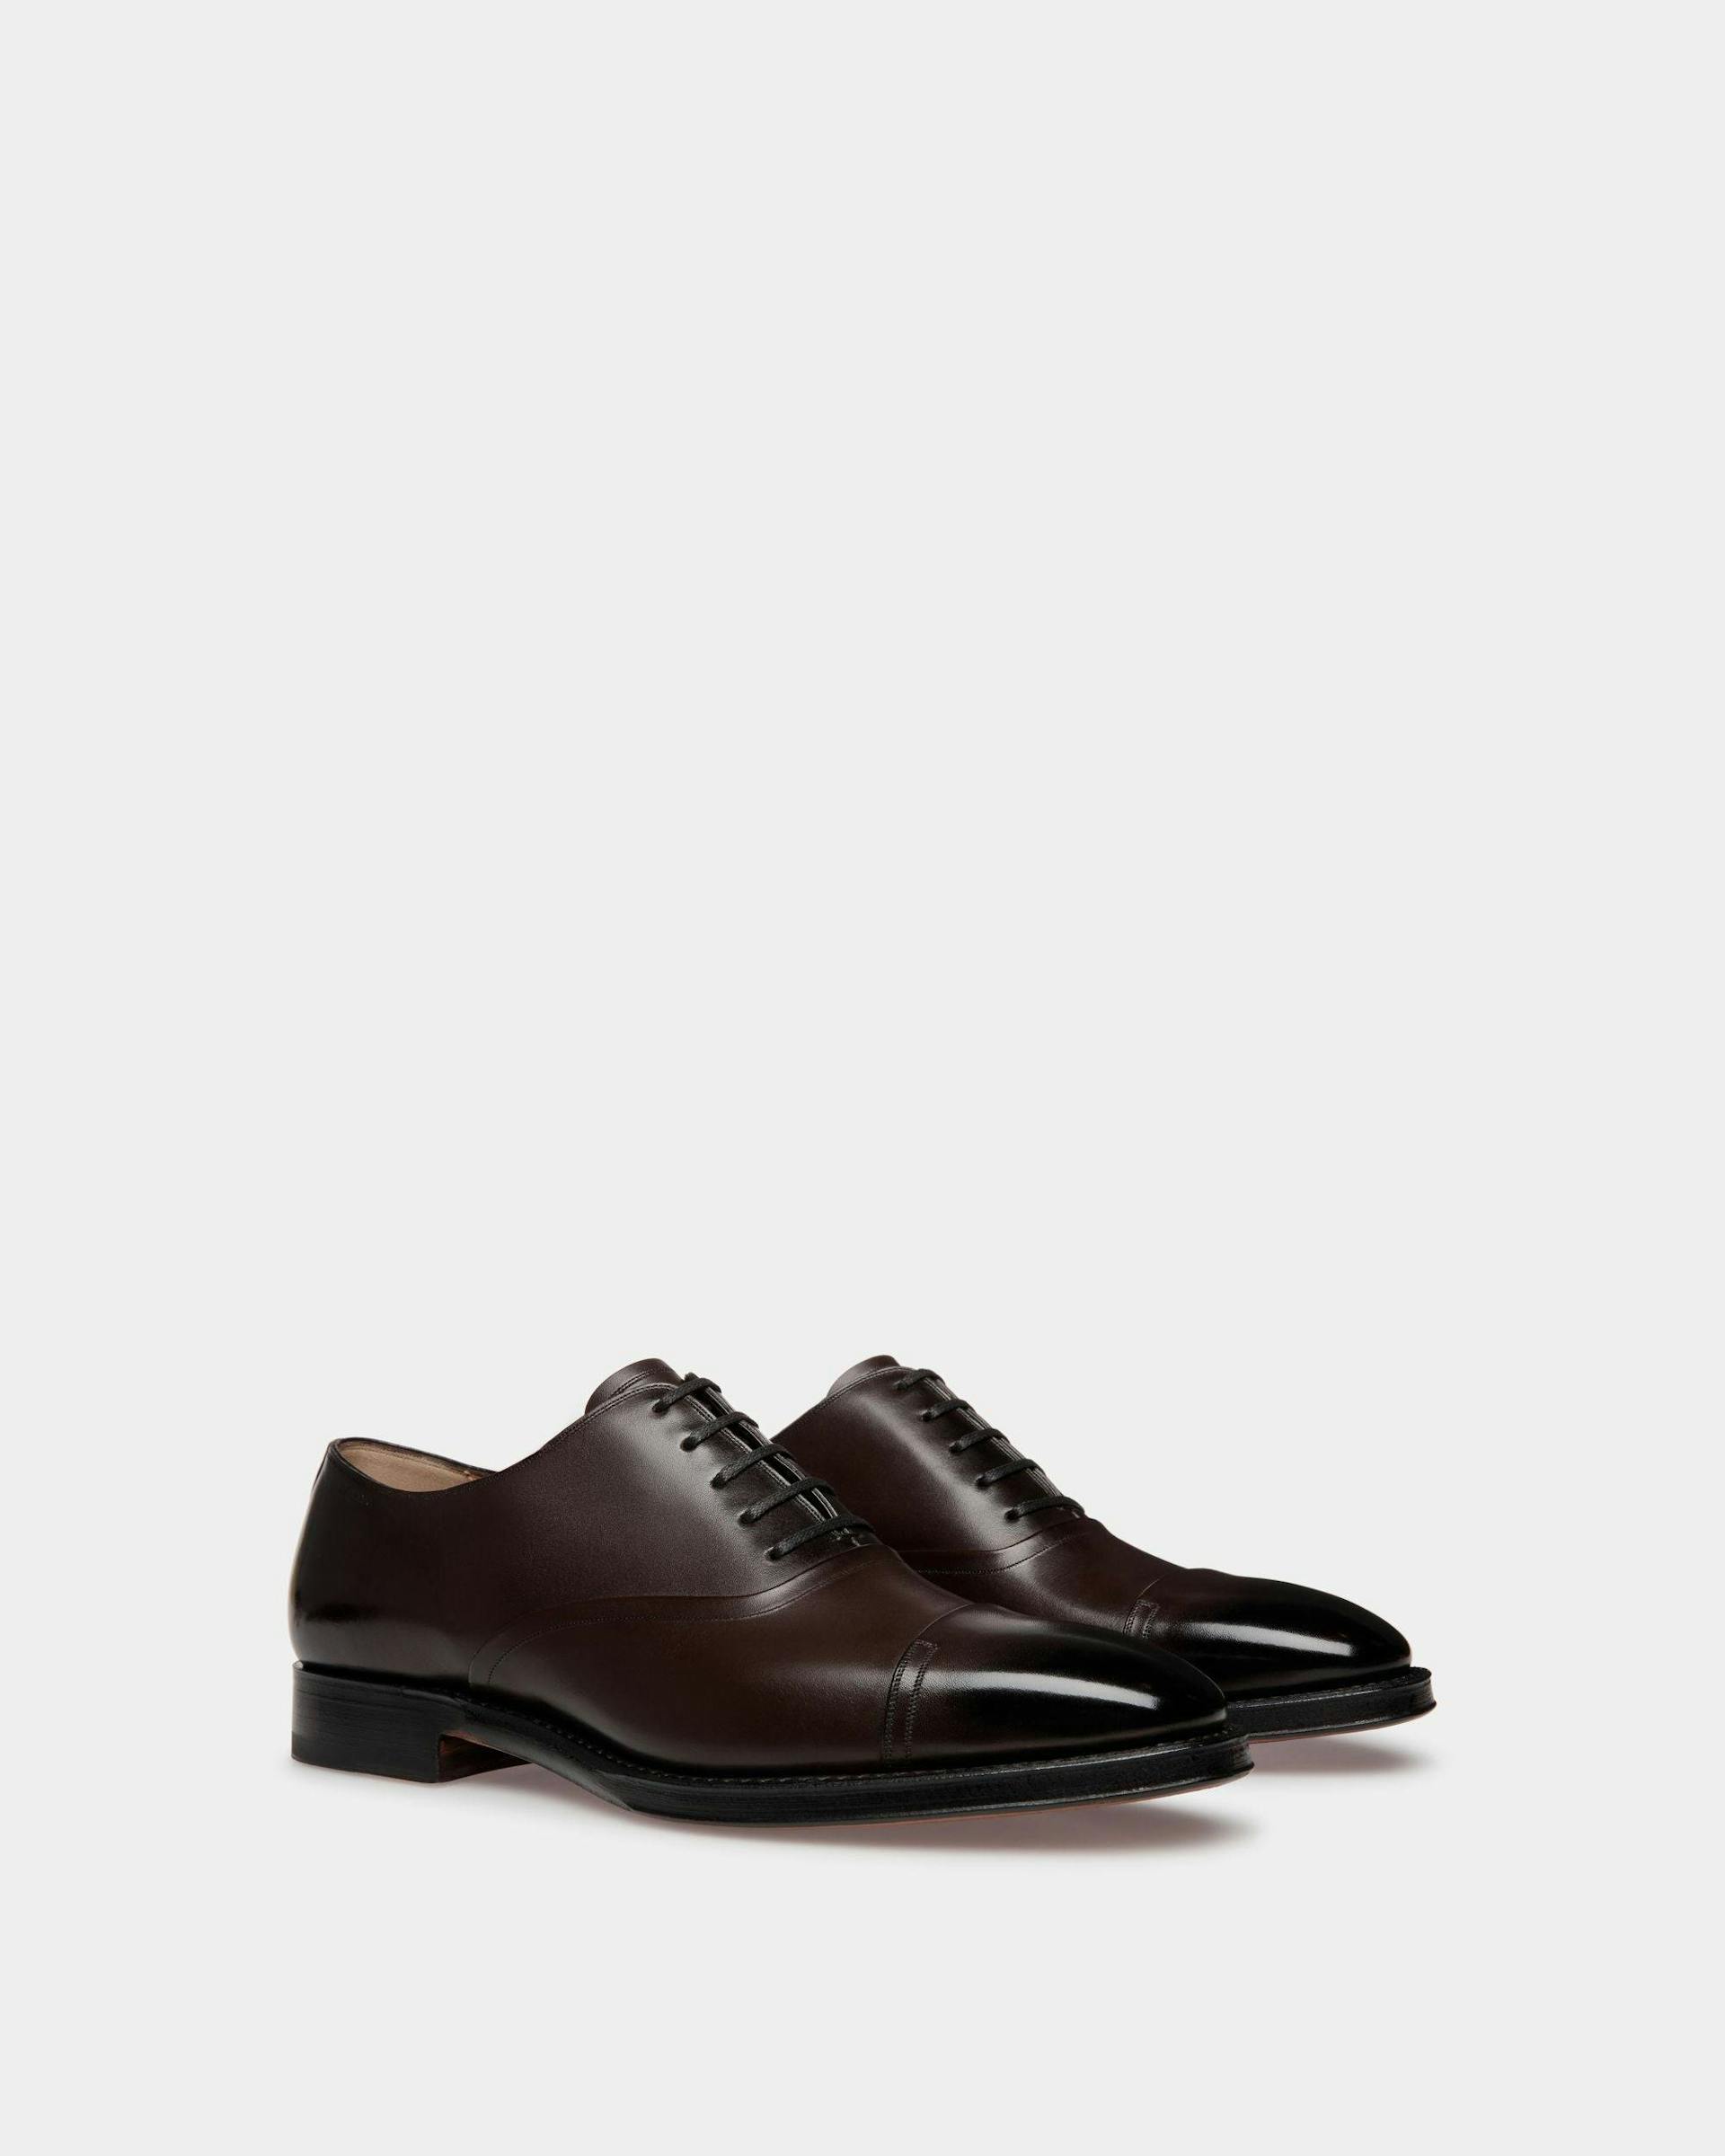 Men's Scribe Oxford Shoes In Brown Leather | Bally | Still Life 3/4 Front